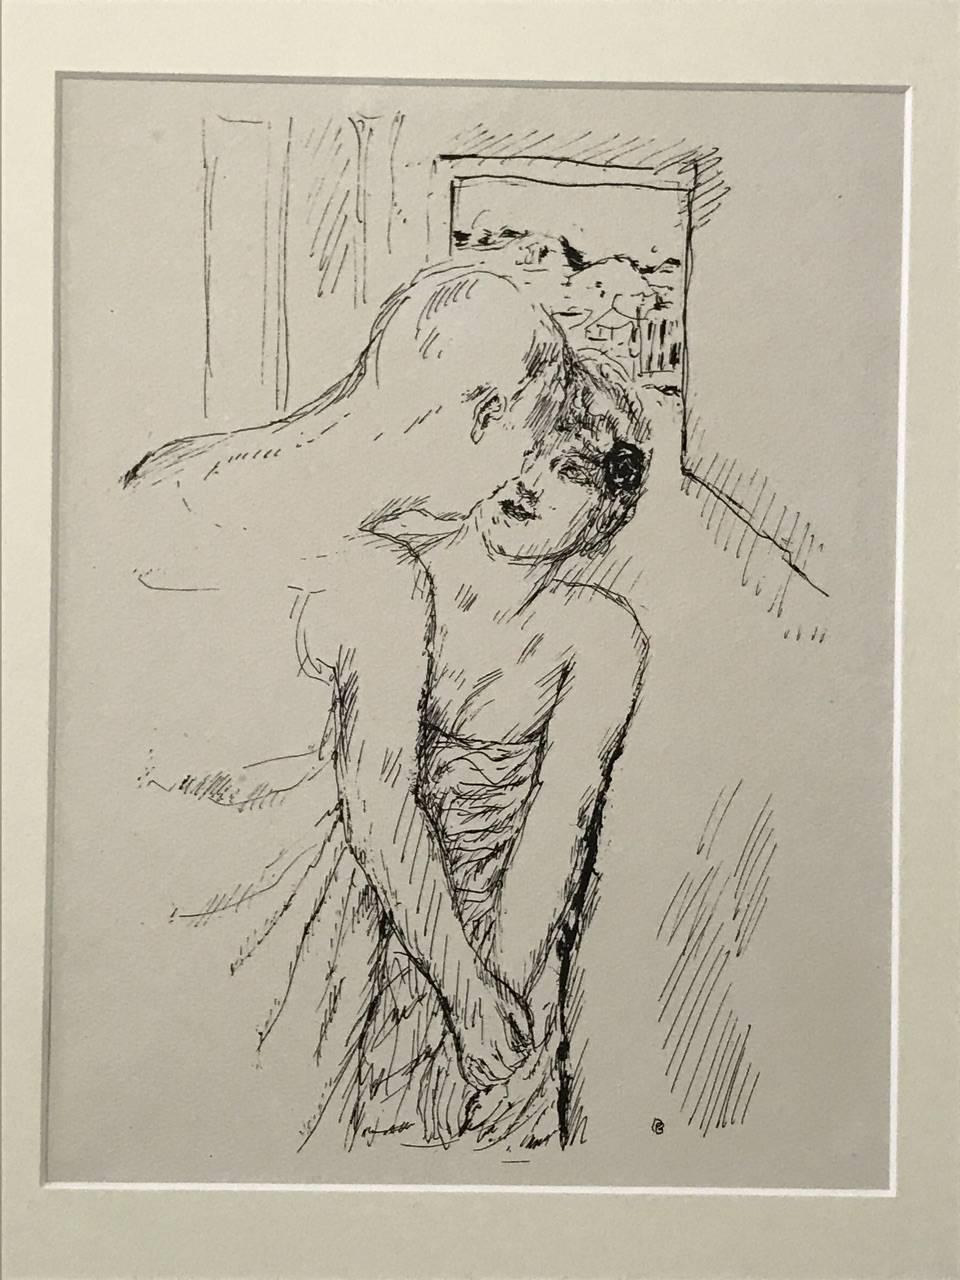 Le baiser, by Pierre Bonnard. Signed on plate..

Dimensions 33x24.5 cm 
With Passepartout 37x53 cm.

This artwork is shipped from Italy. Under existing legislation, any artwork in Italy created over 50 years ago by an artist who has died requires a